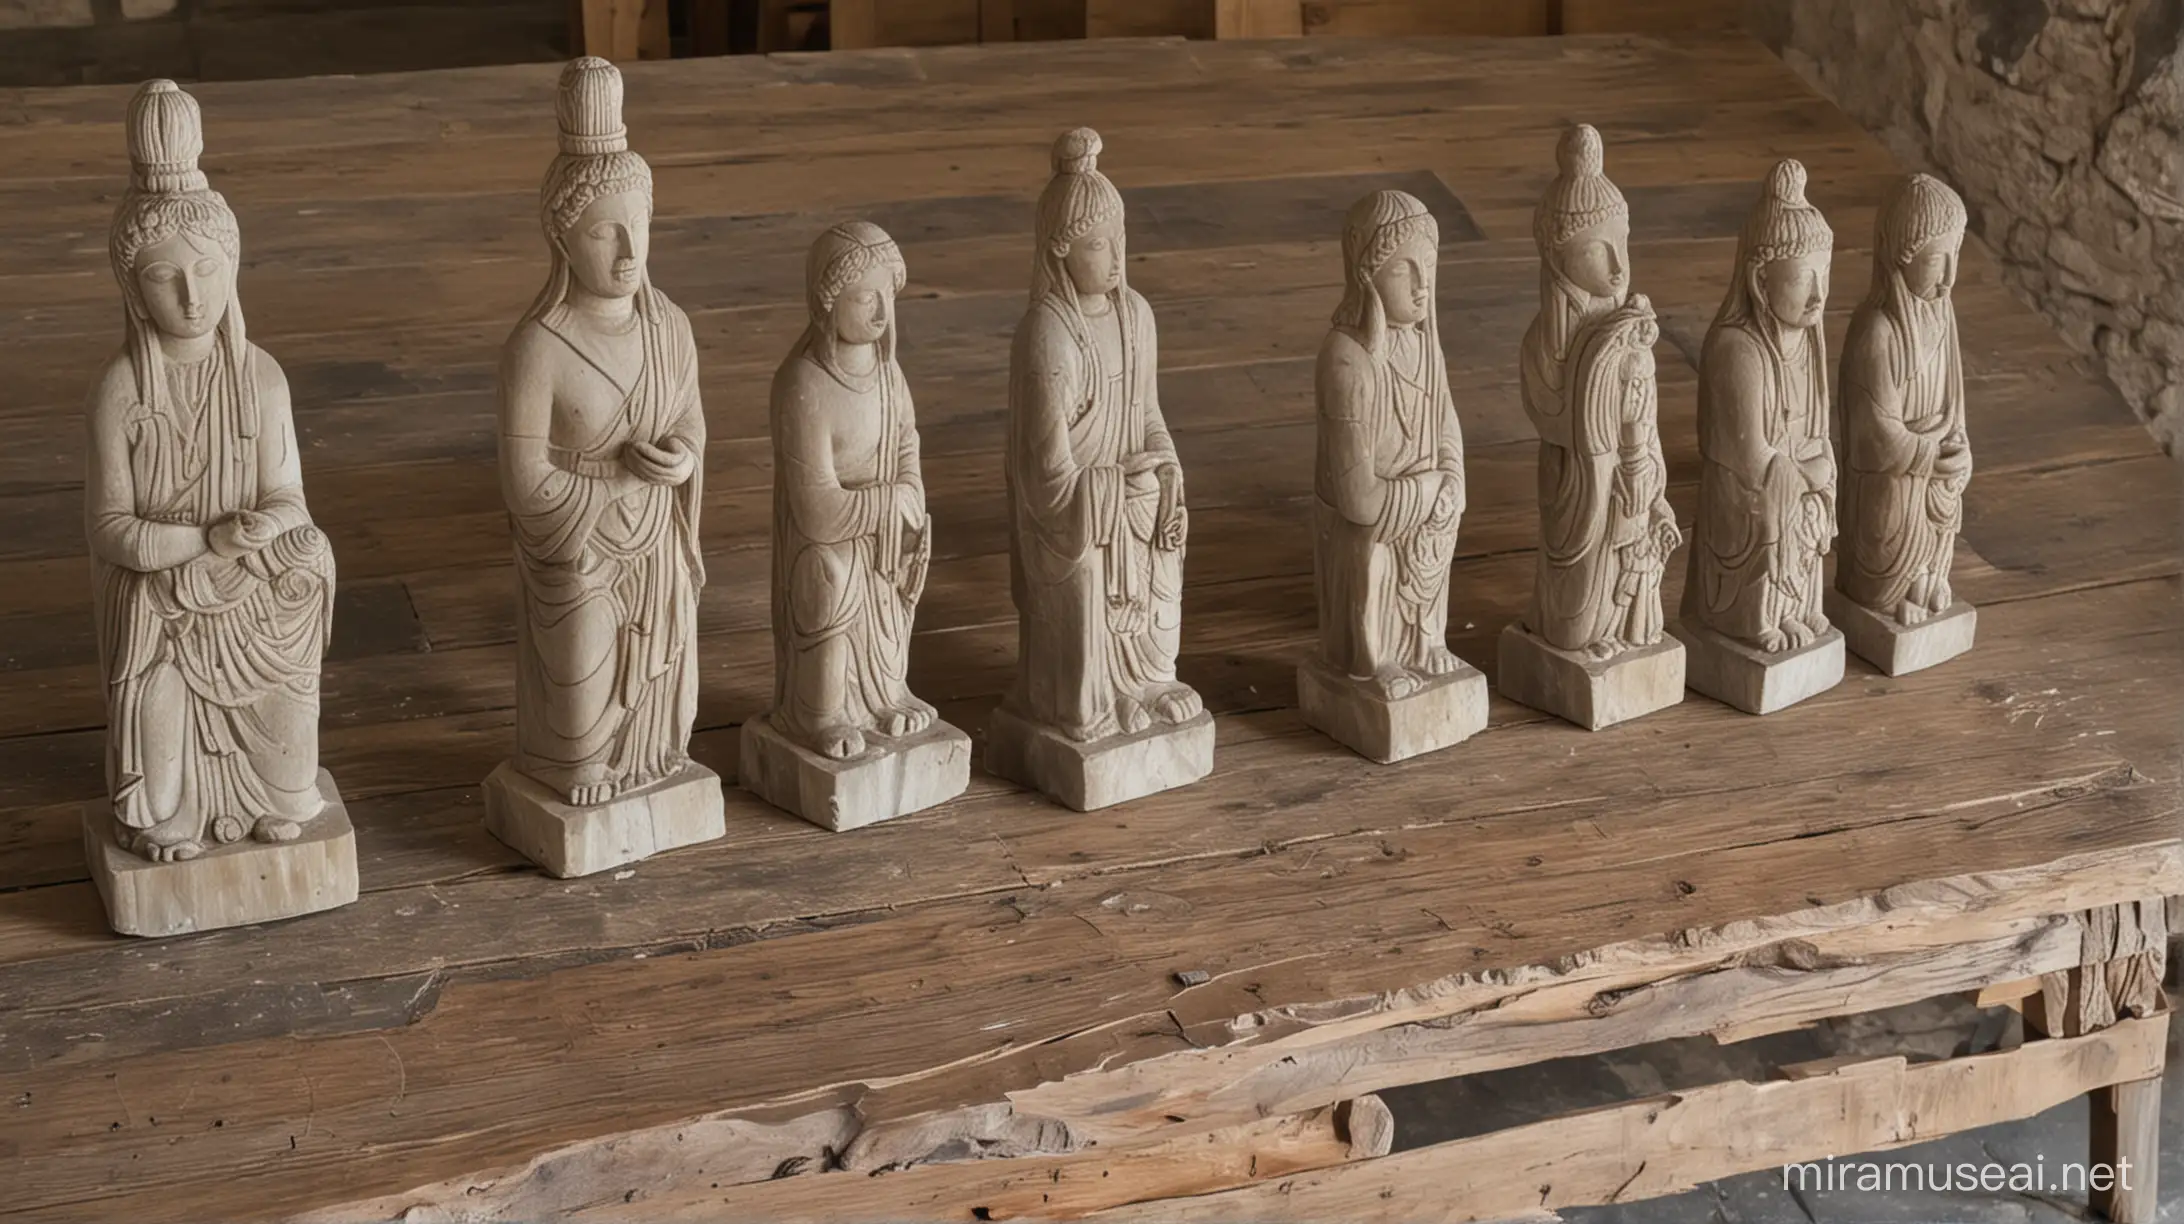 Wooden Table with Varied Stone Statues Natural Harmony and Artistic Display